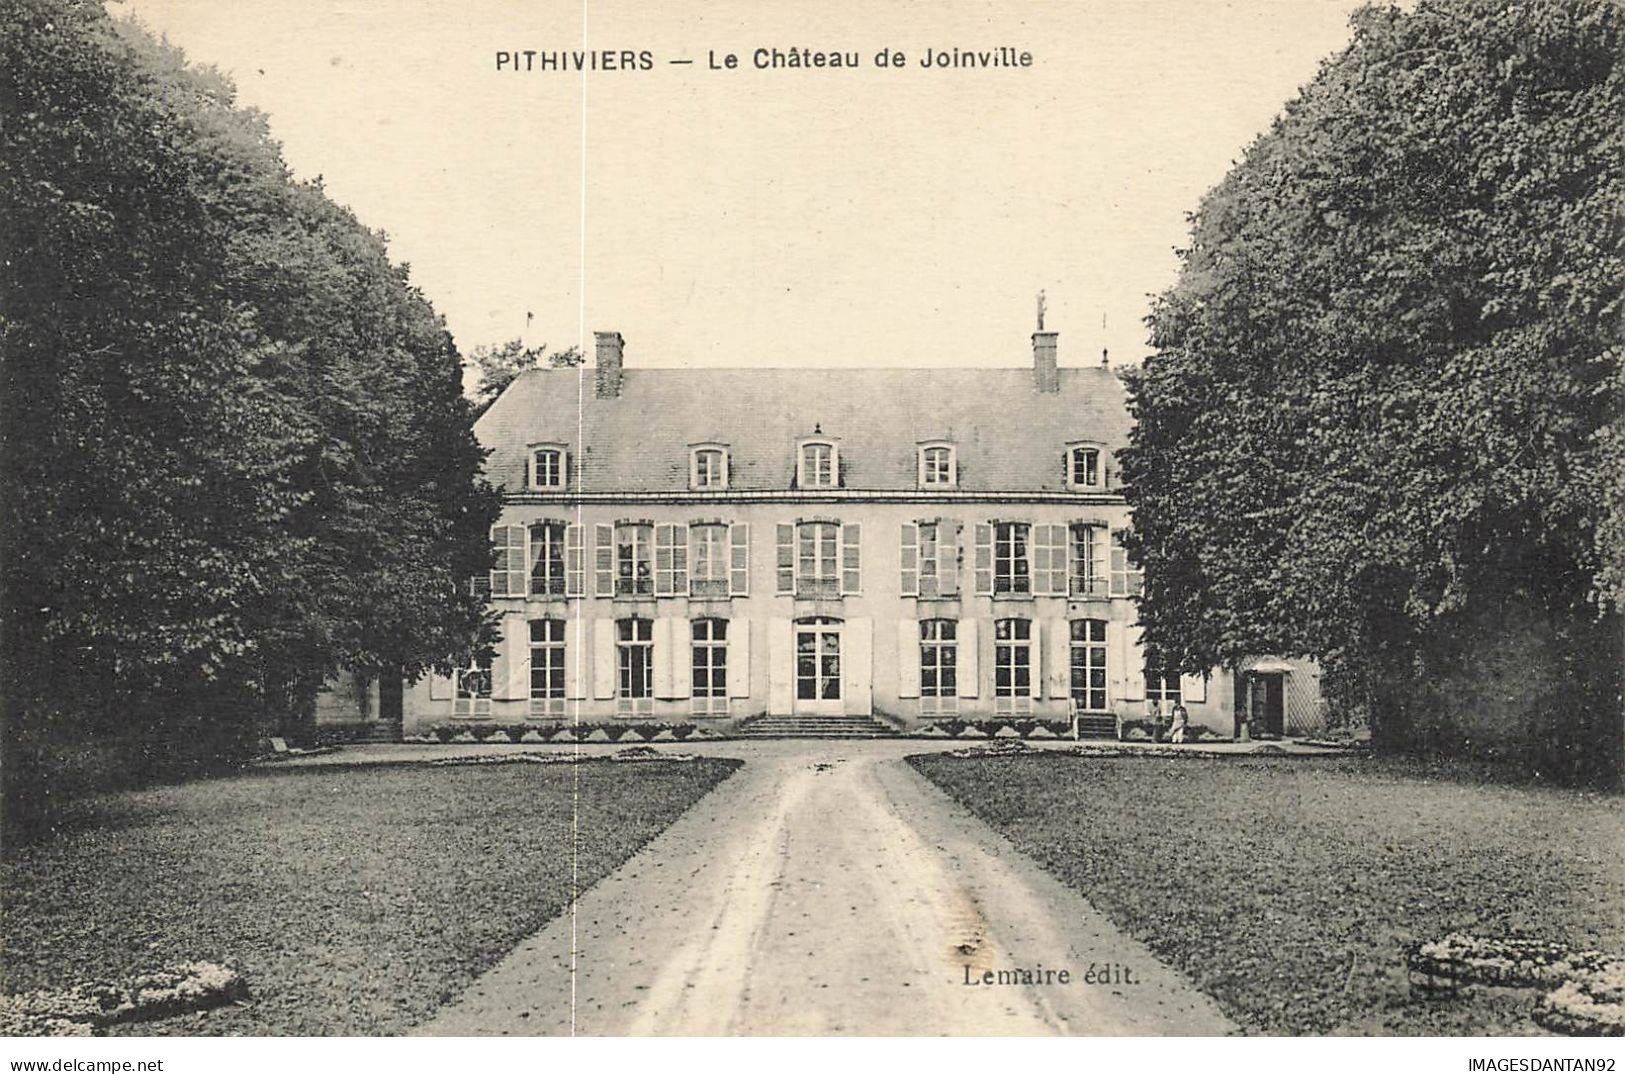 45 PITHIVIERS AN#MK0347 LE CHATEAU DE JOINVILLE - Pithiviers